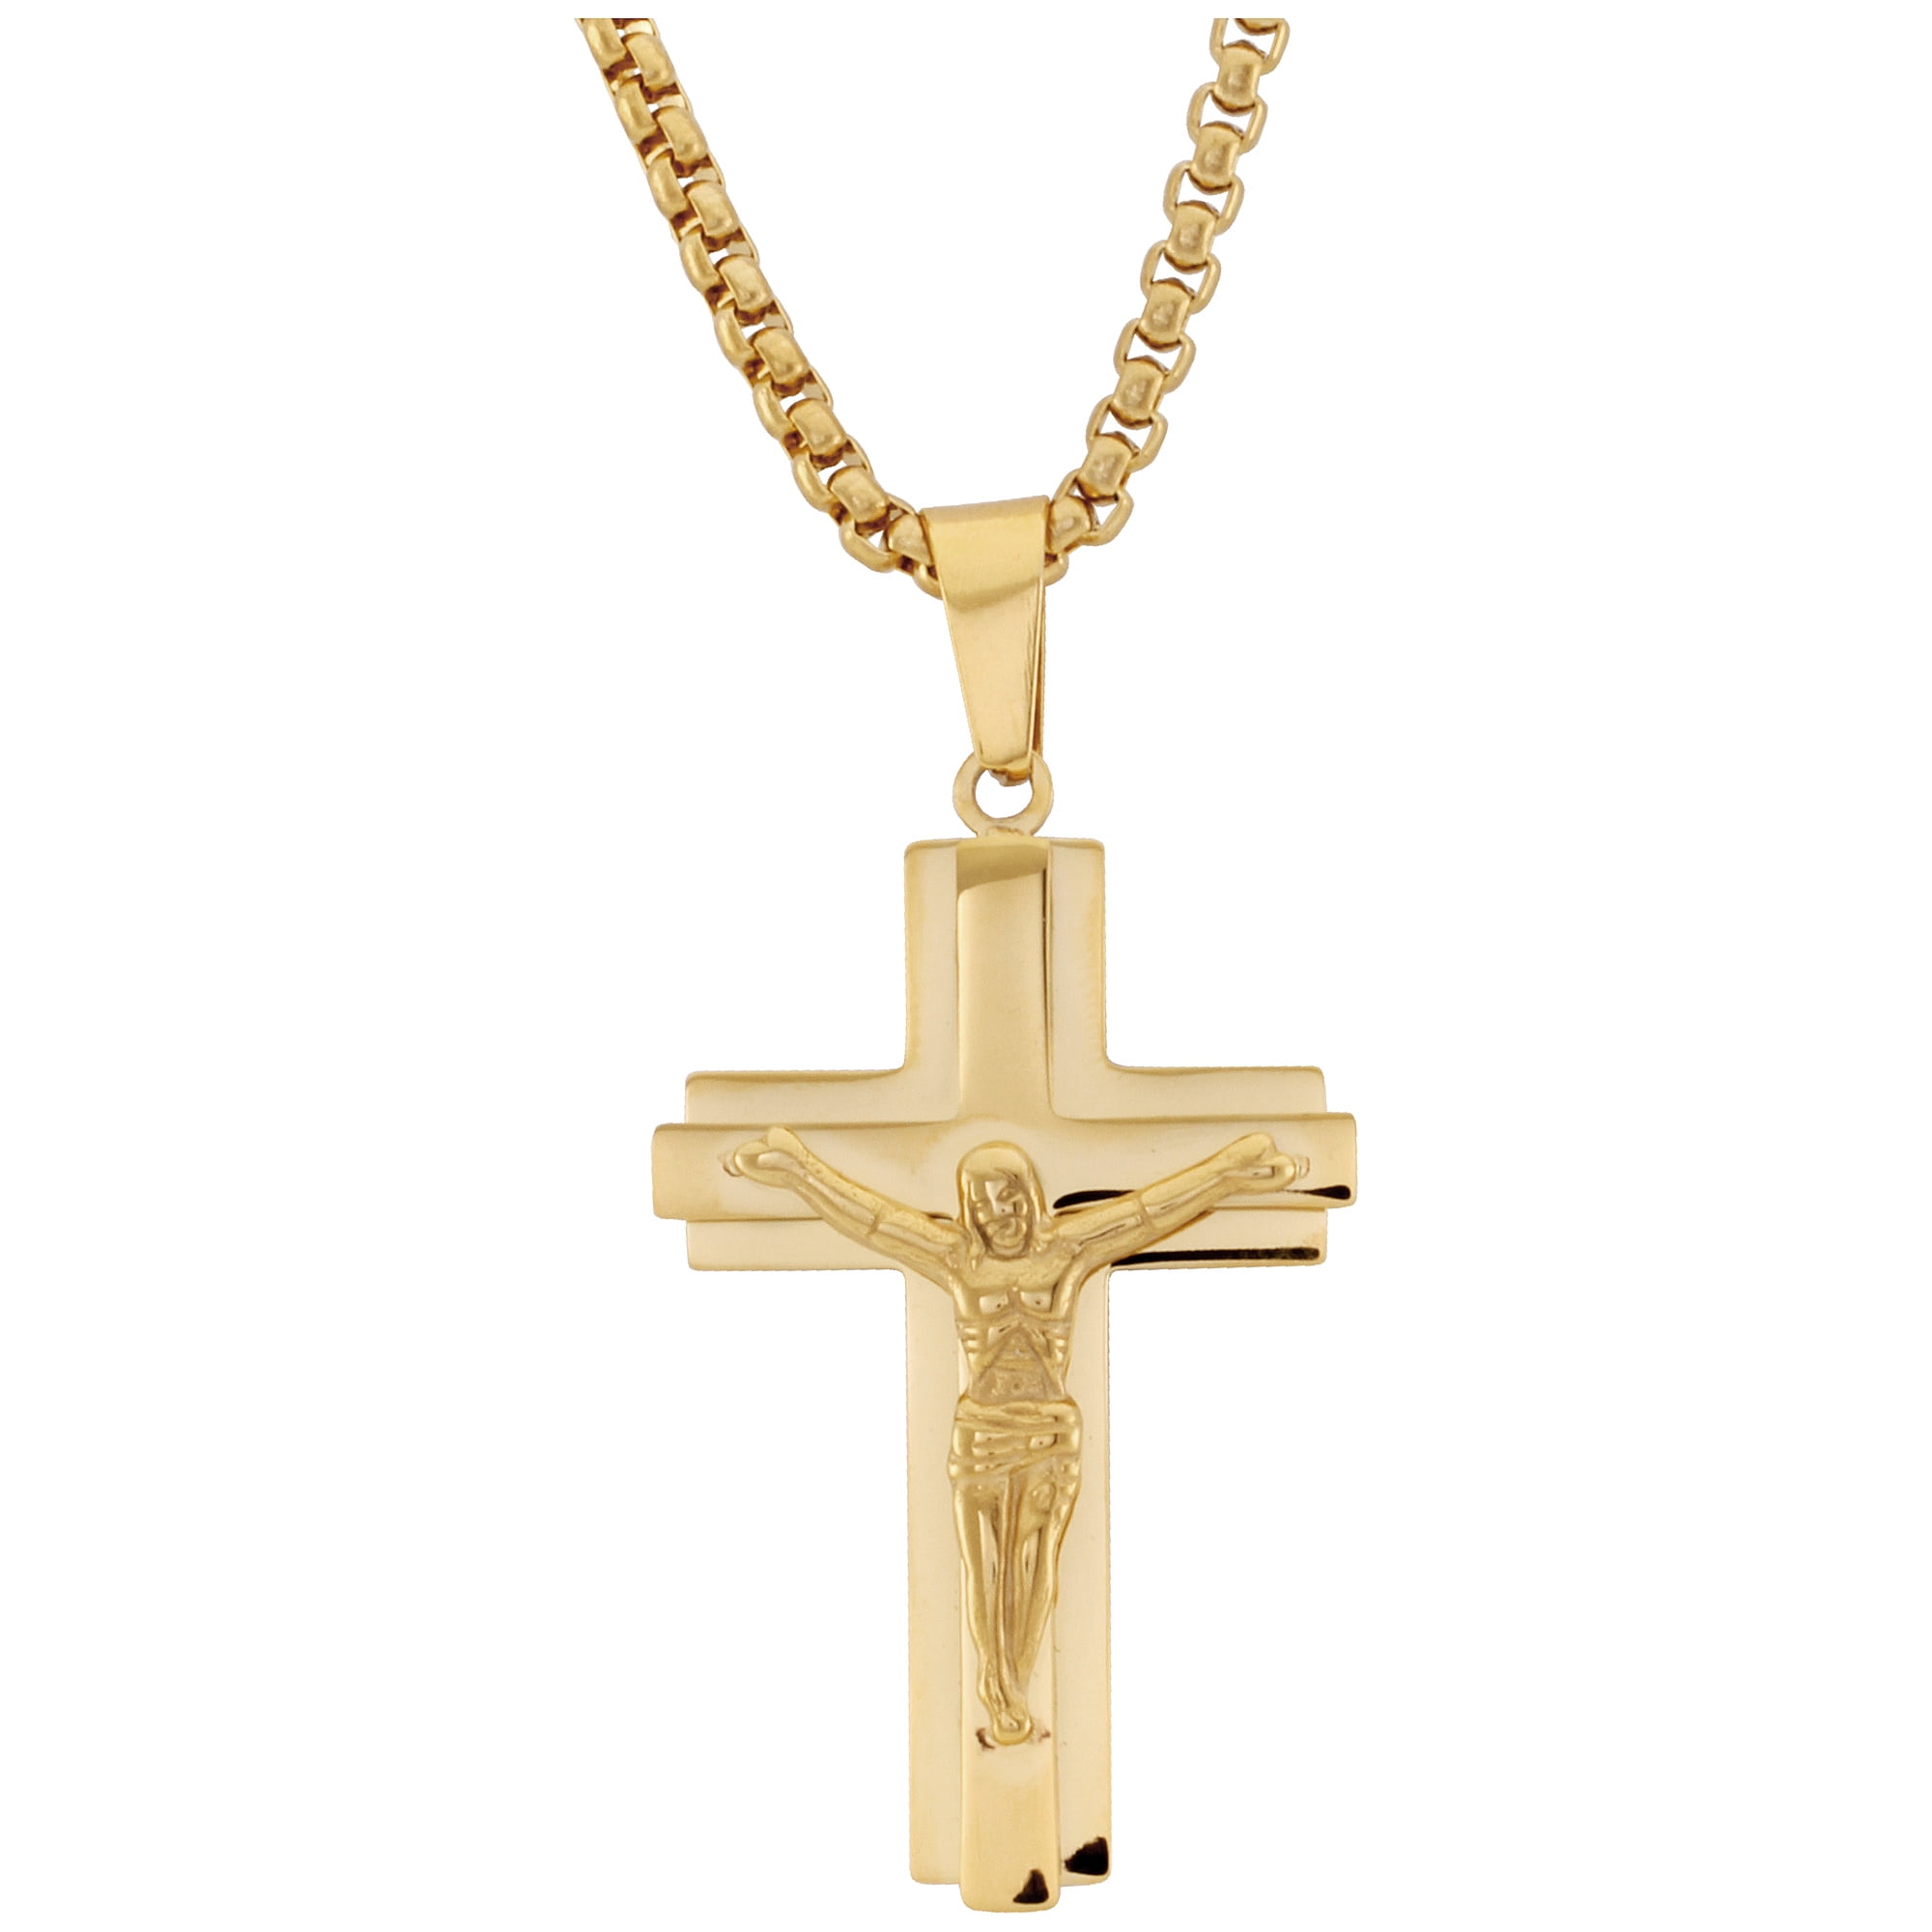 Rocawear - Rocawear Mens Gold Necklace With Gold Cross Pendant - Walmart.com